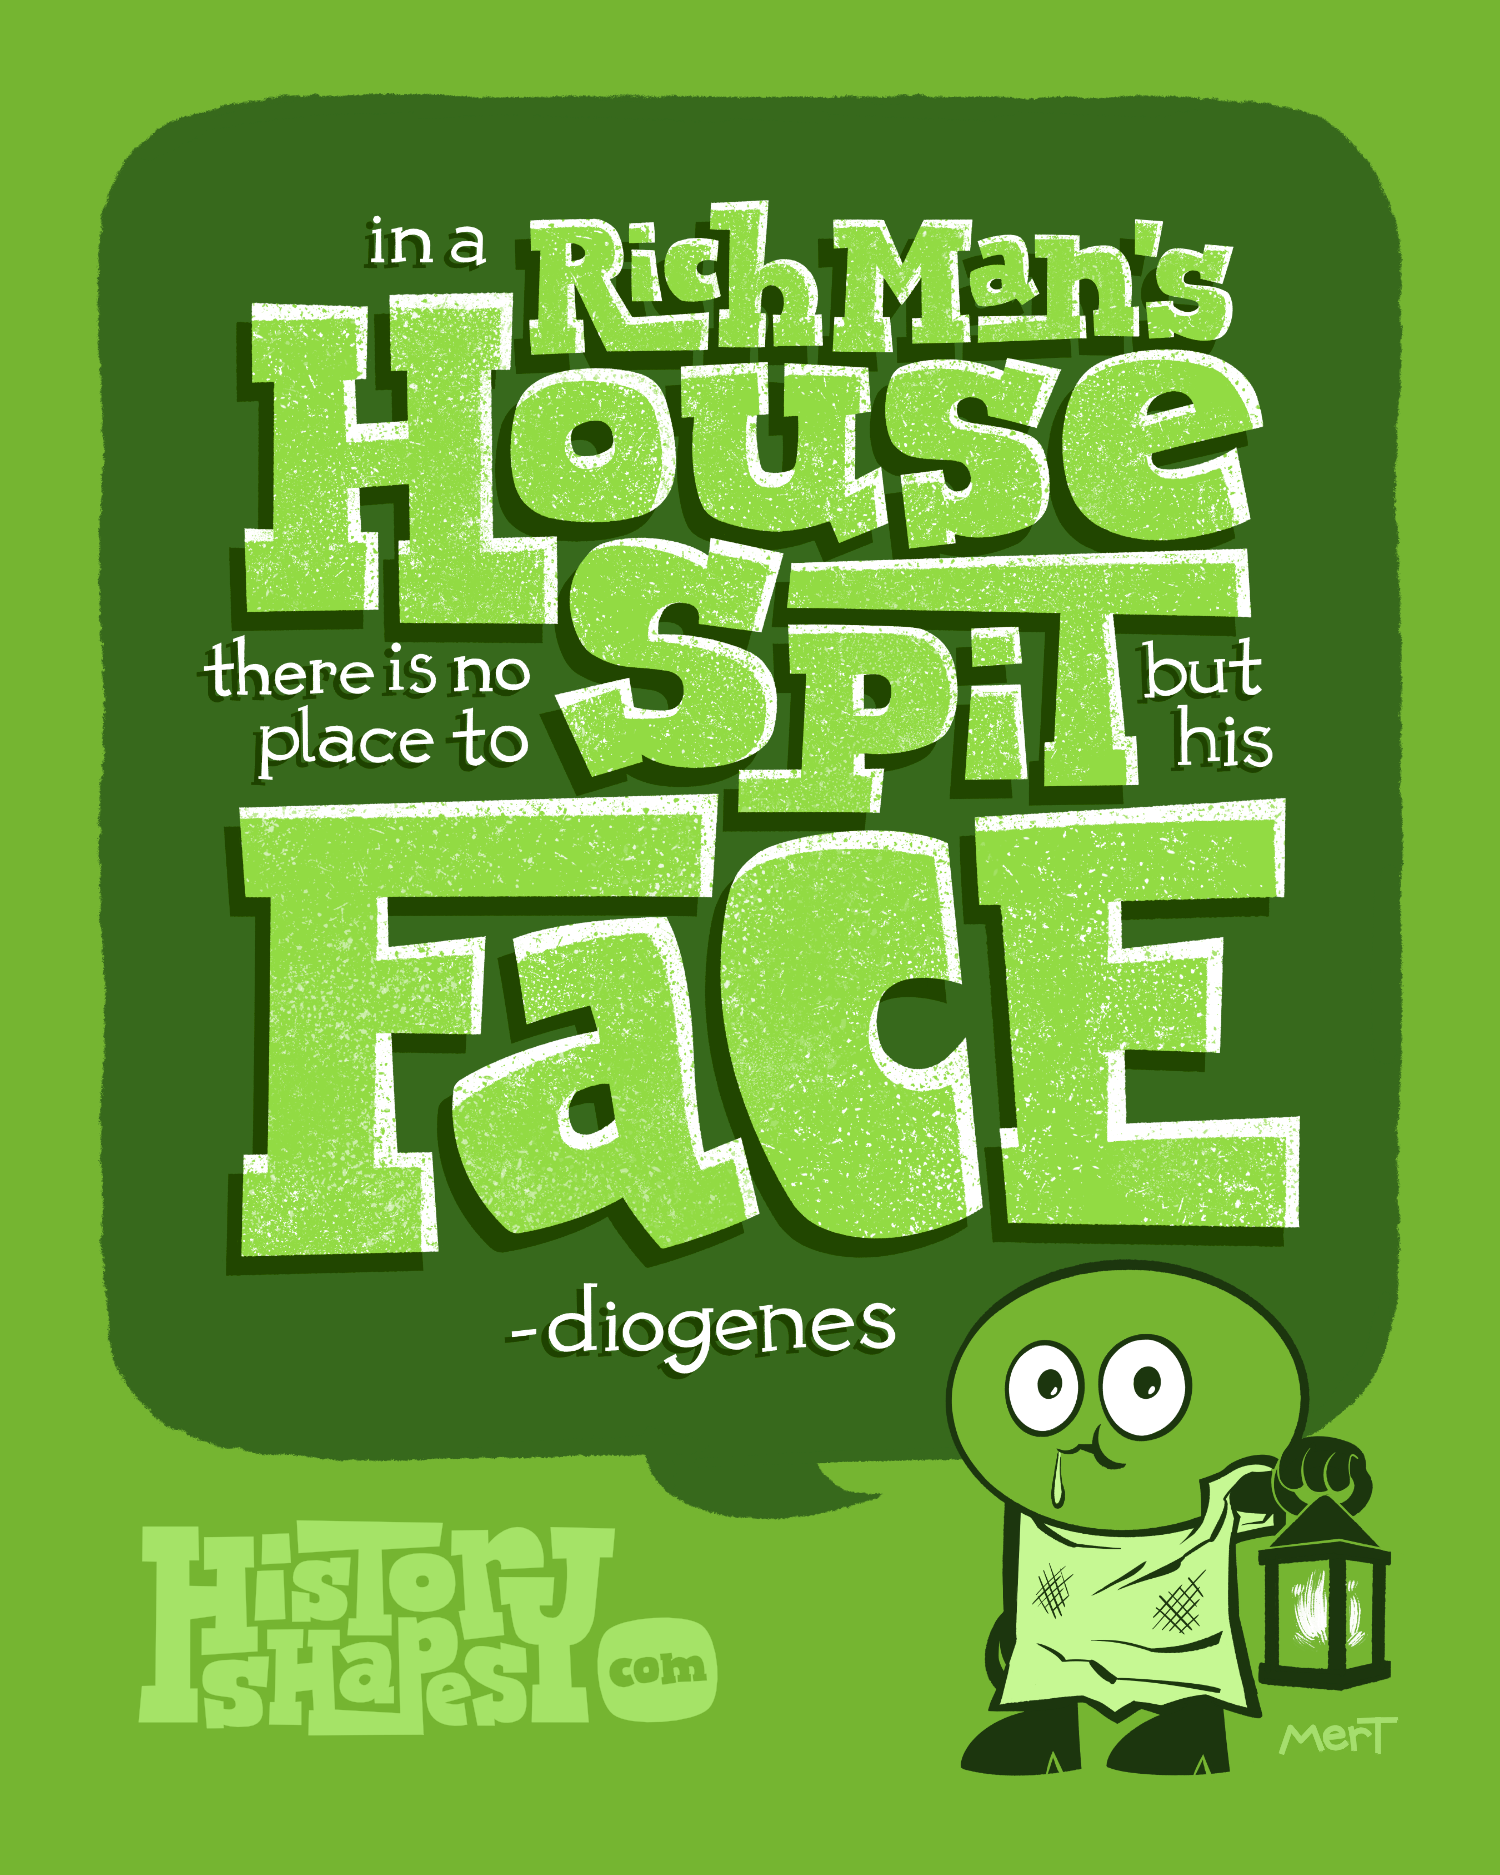 Morgan, an awkward green oval, is dressed as Diogenes with the quote "In a rich man's house there is no place to spit but his face."